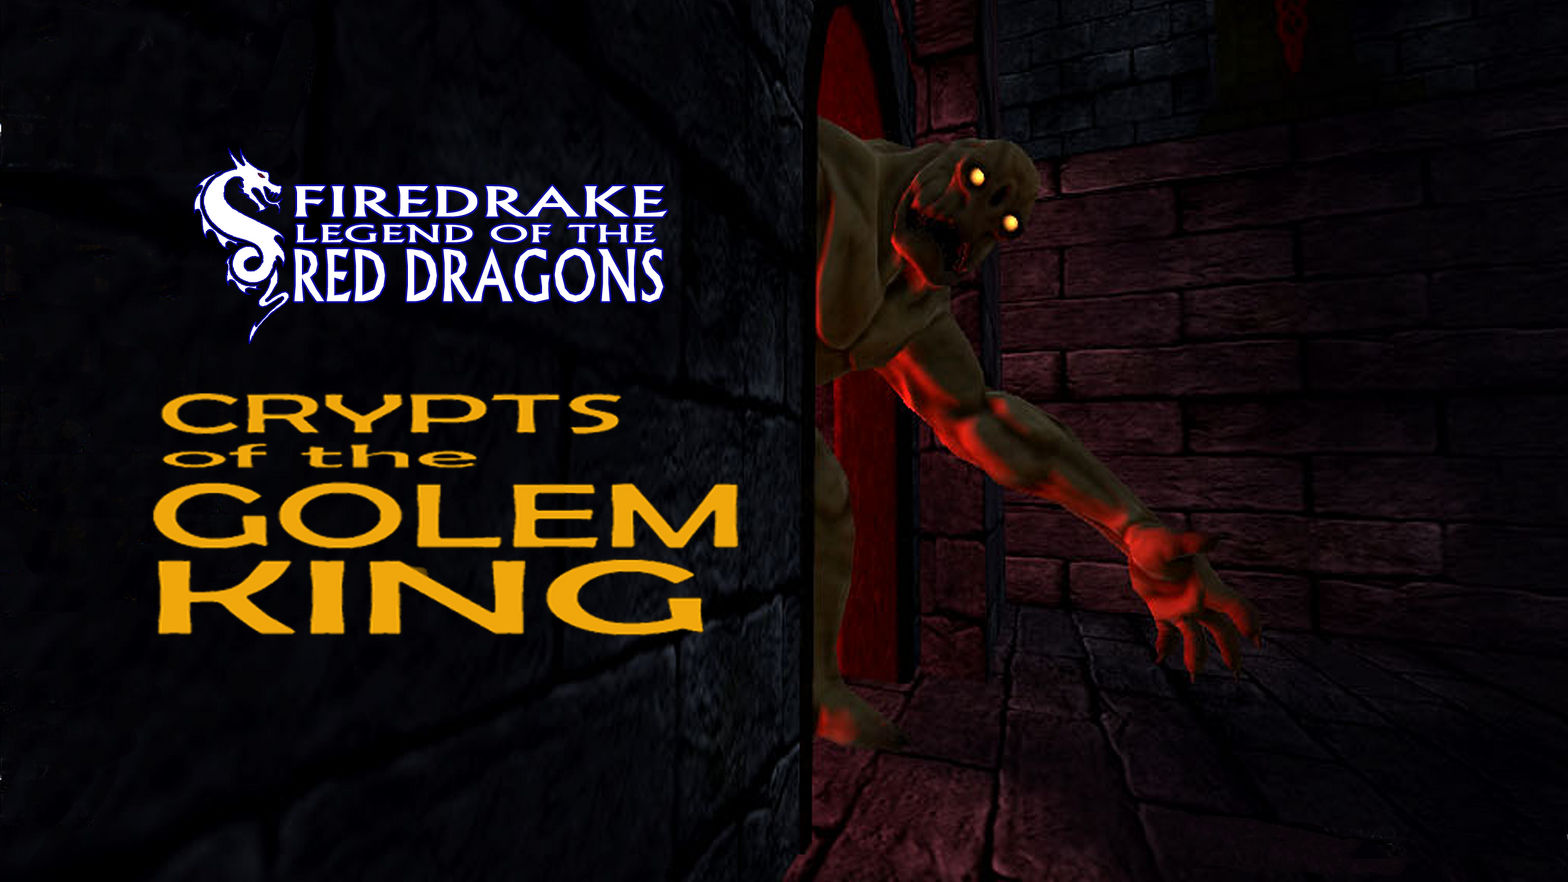 Firedrake Crypts Of The Golem King